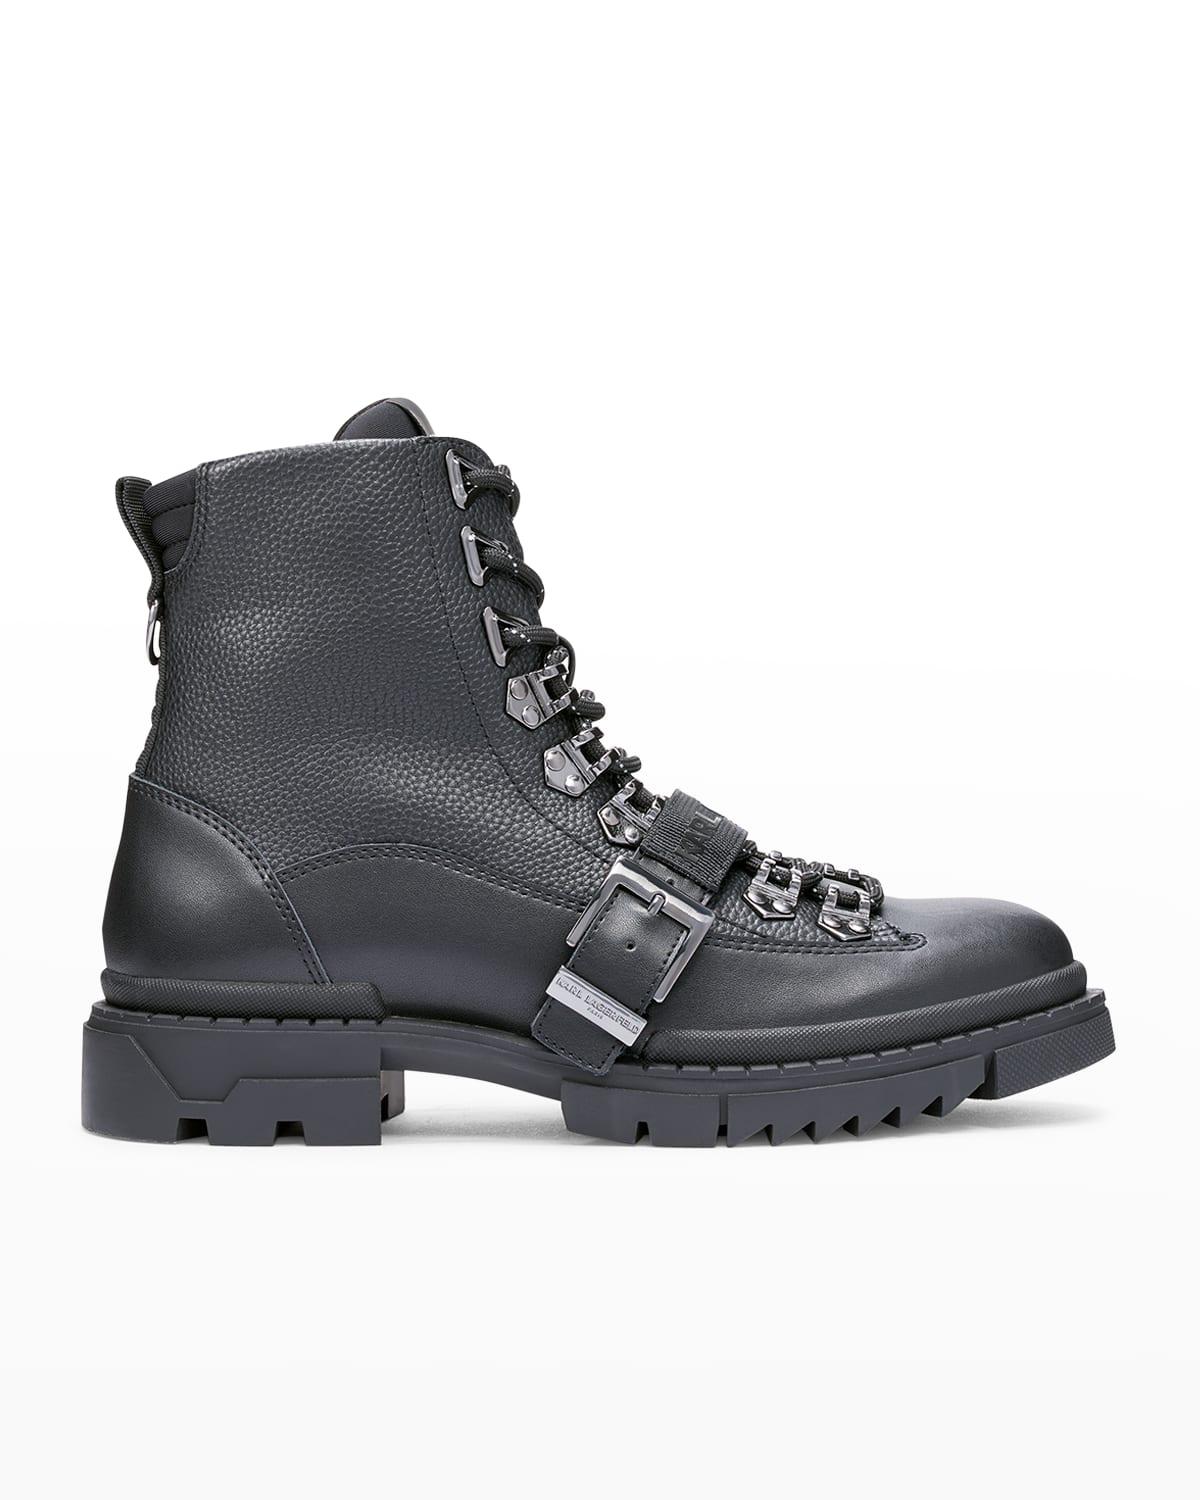 Karl Lagerfeld Buckle Leather Lug-sole Combat Boots in Black for Men | Lyst